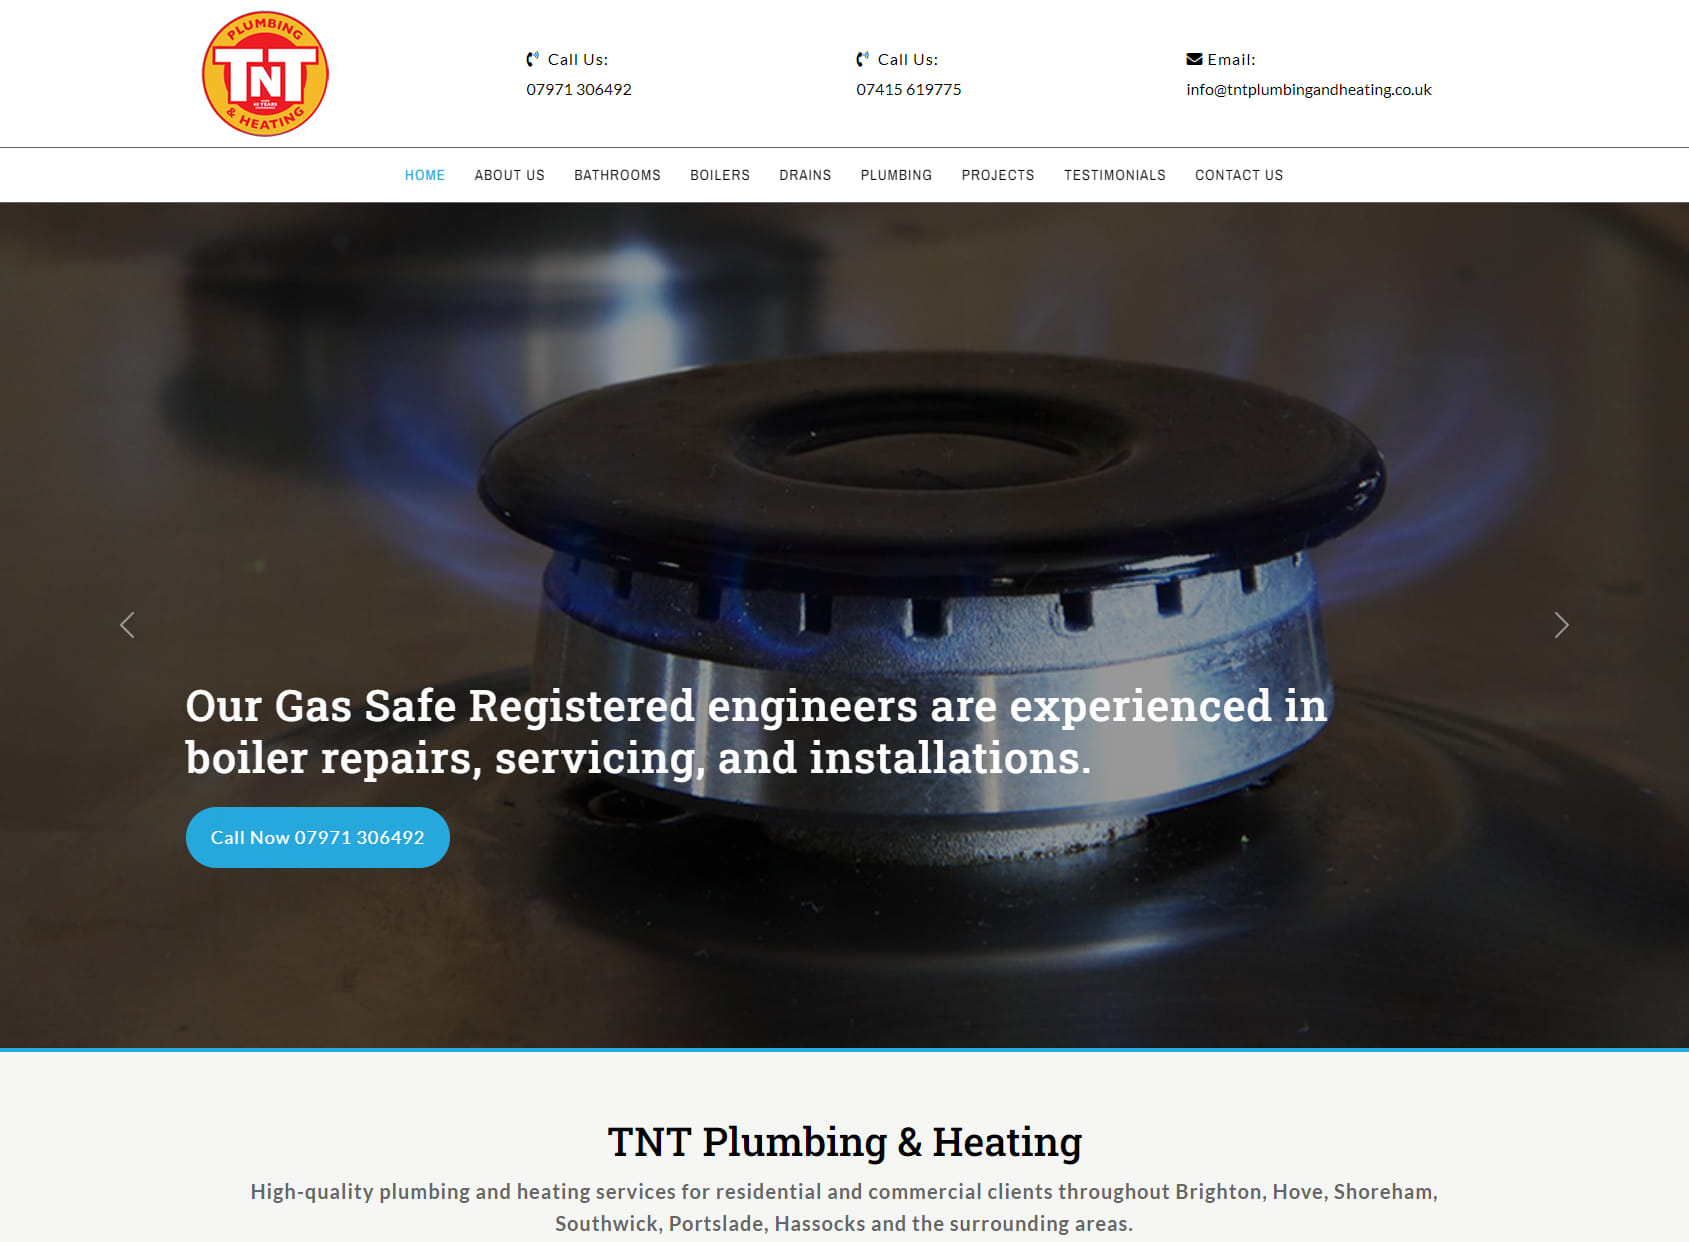 TNT plumbing and heating